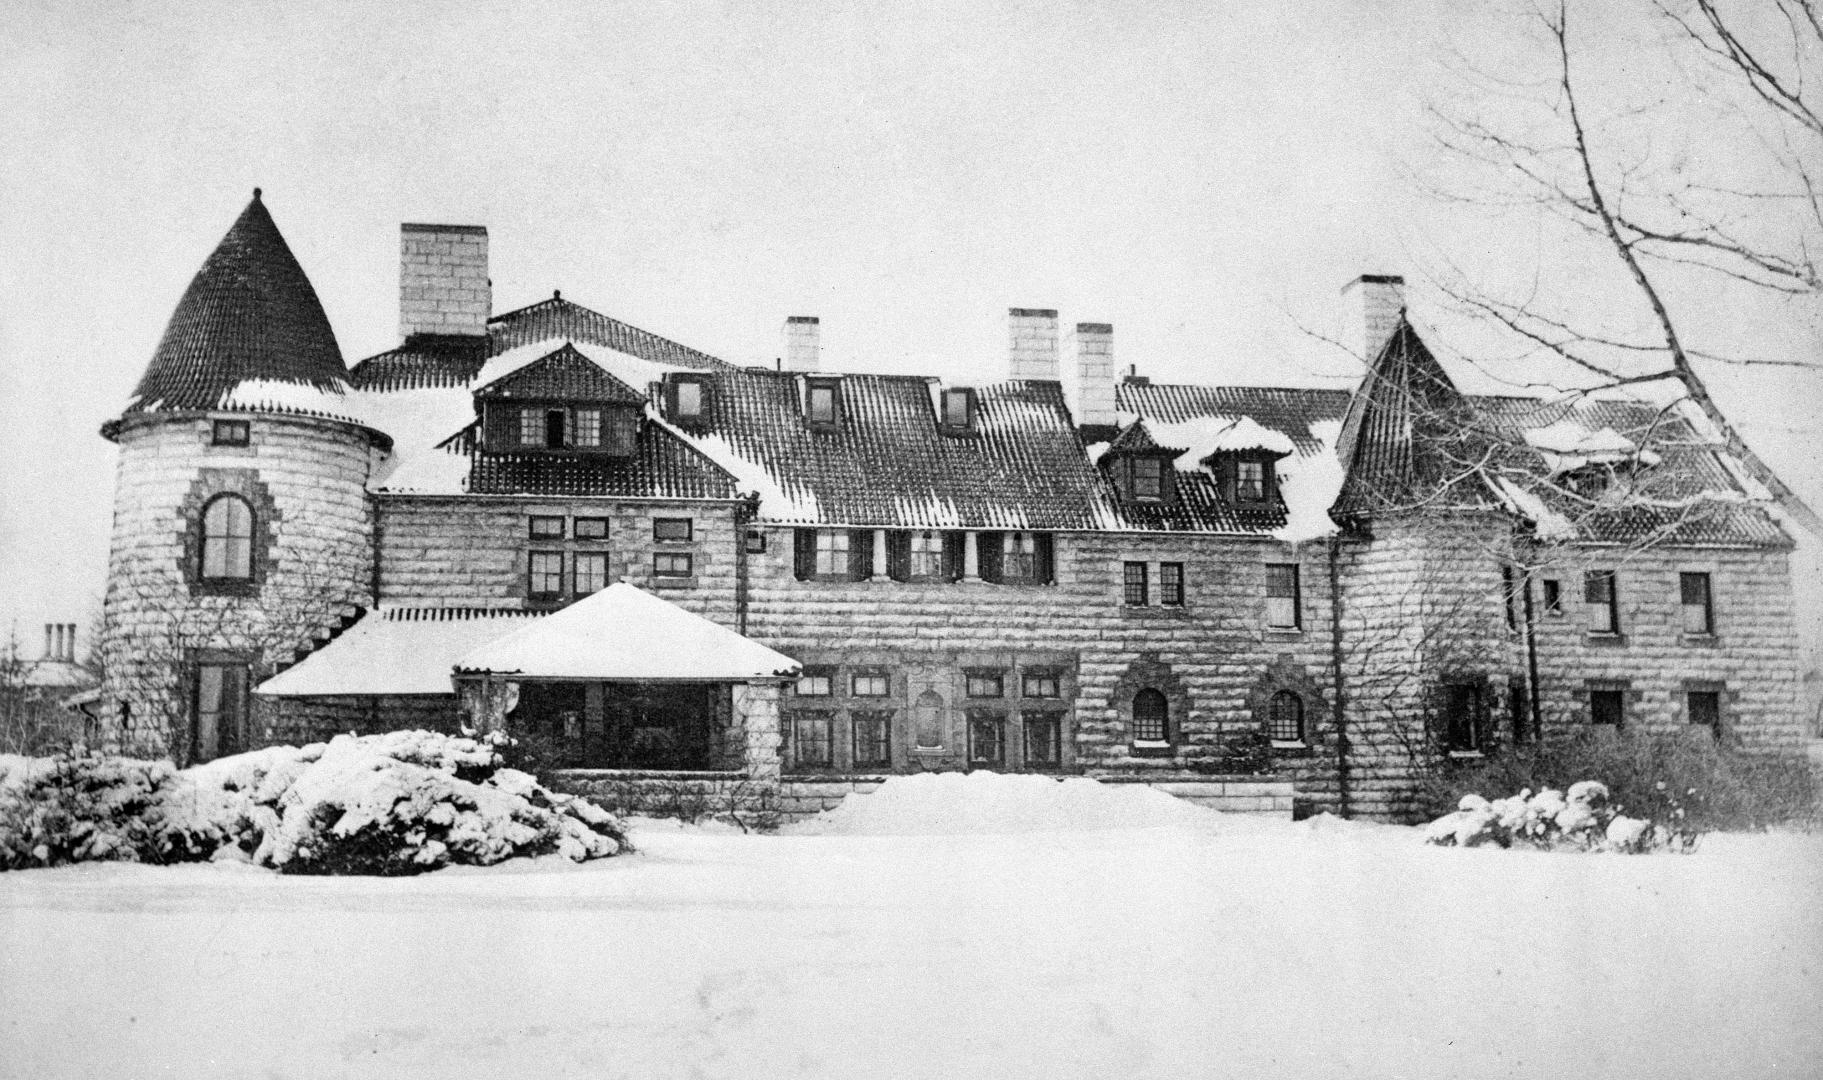 Image shows an exterior of a big three storey house in winter.